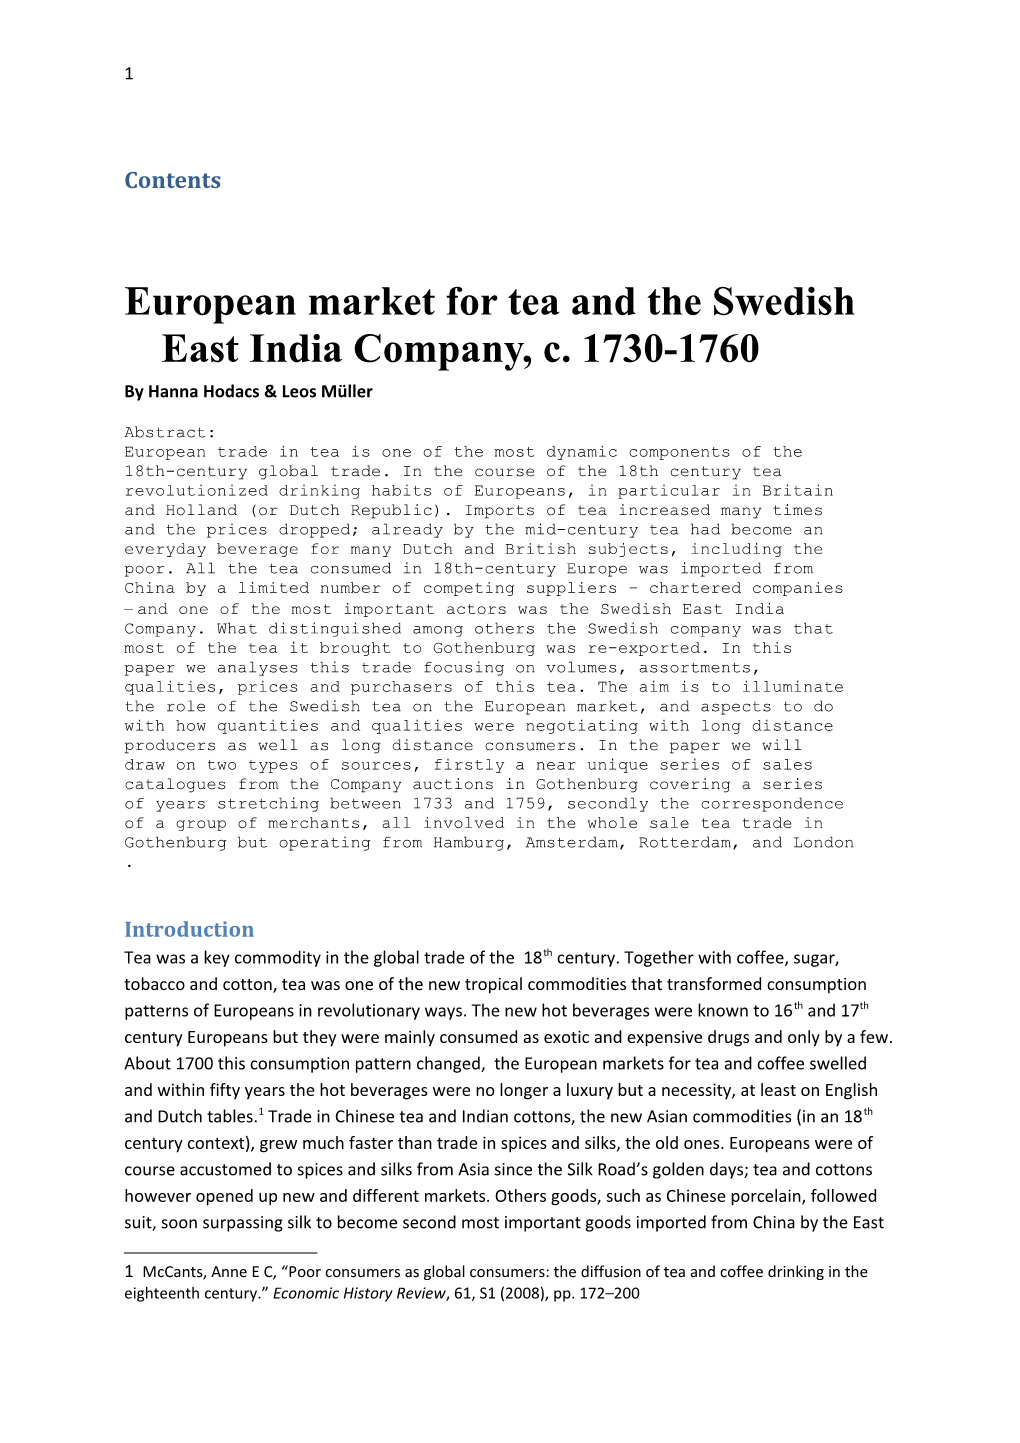 Early Modern Tea and European Consumers 4